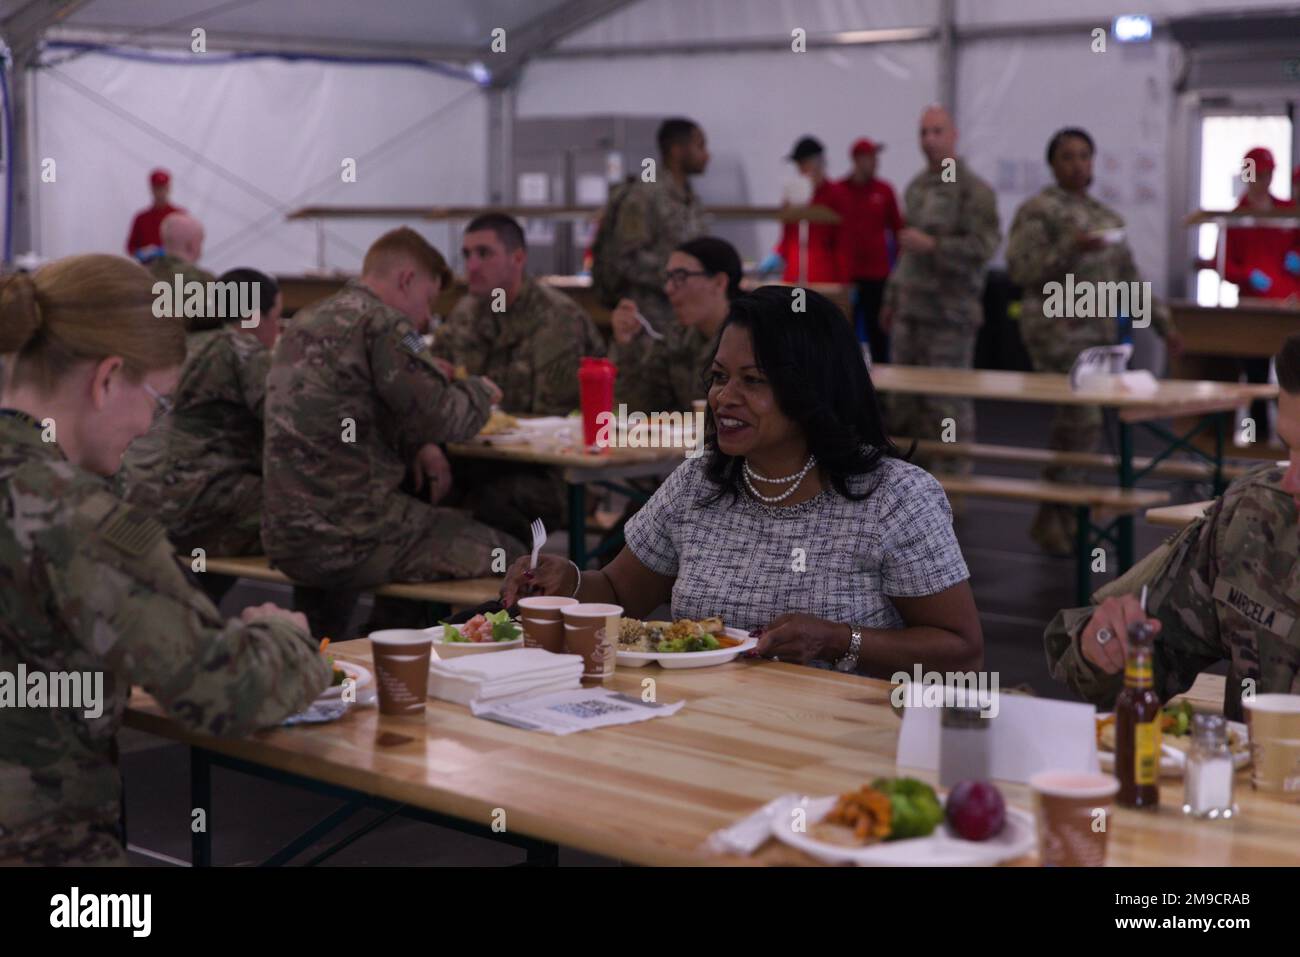 ANSBACH, Germany (May 17, 2022)- General Counsel of the Army, the Honorable Carrie F. Ricci, has lunch with V Corps Soldiers at the dining facility at U.S. Army Garrison Ansbach – Barton Barracks, Germany, Monday, May 16, 2022, during her tour of V Corps and USAG Ansbach. V Corps works alongside NATO allies and regional security partners to provide combat ready forces, execute joint and multinational training exercises to improve interoperability, and ensure an appropriate collective posture of deterrence and defense.. Stock Photo